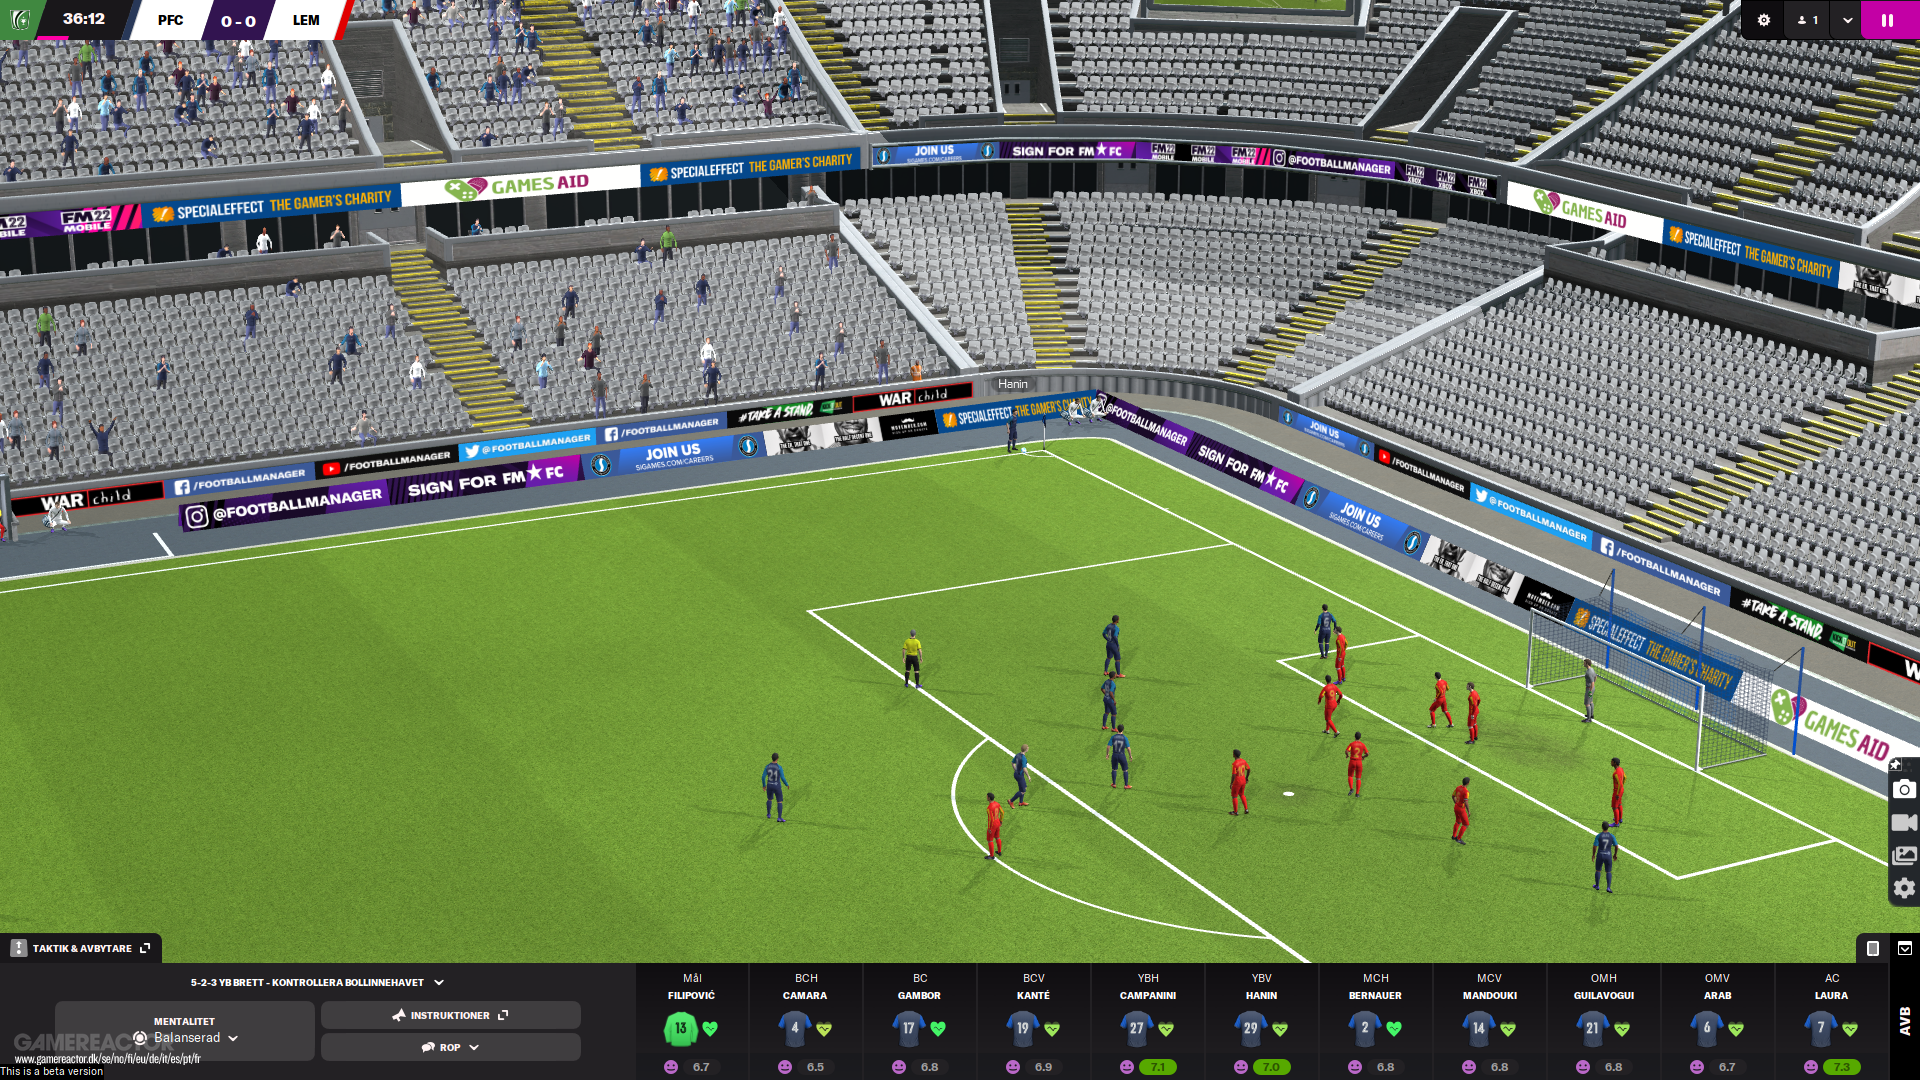 REVIEW: Football Manager 2022, otra más